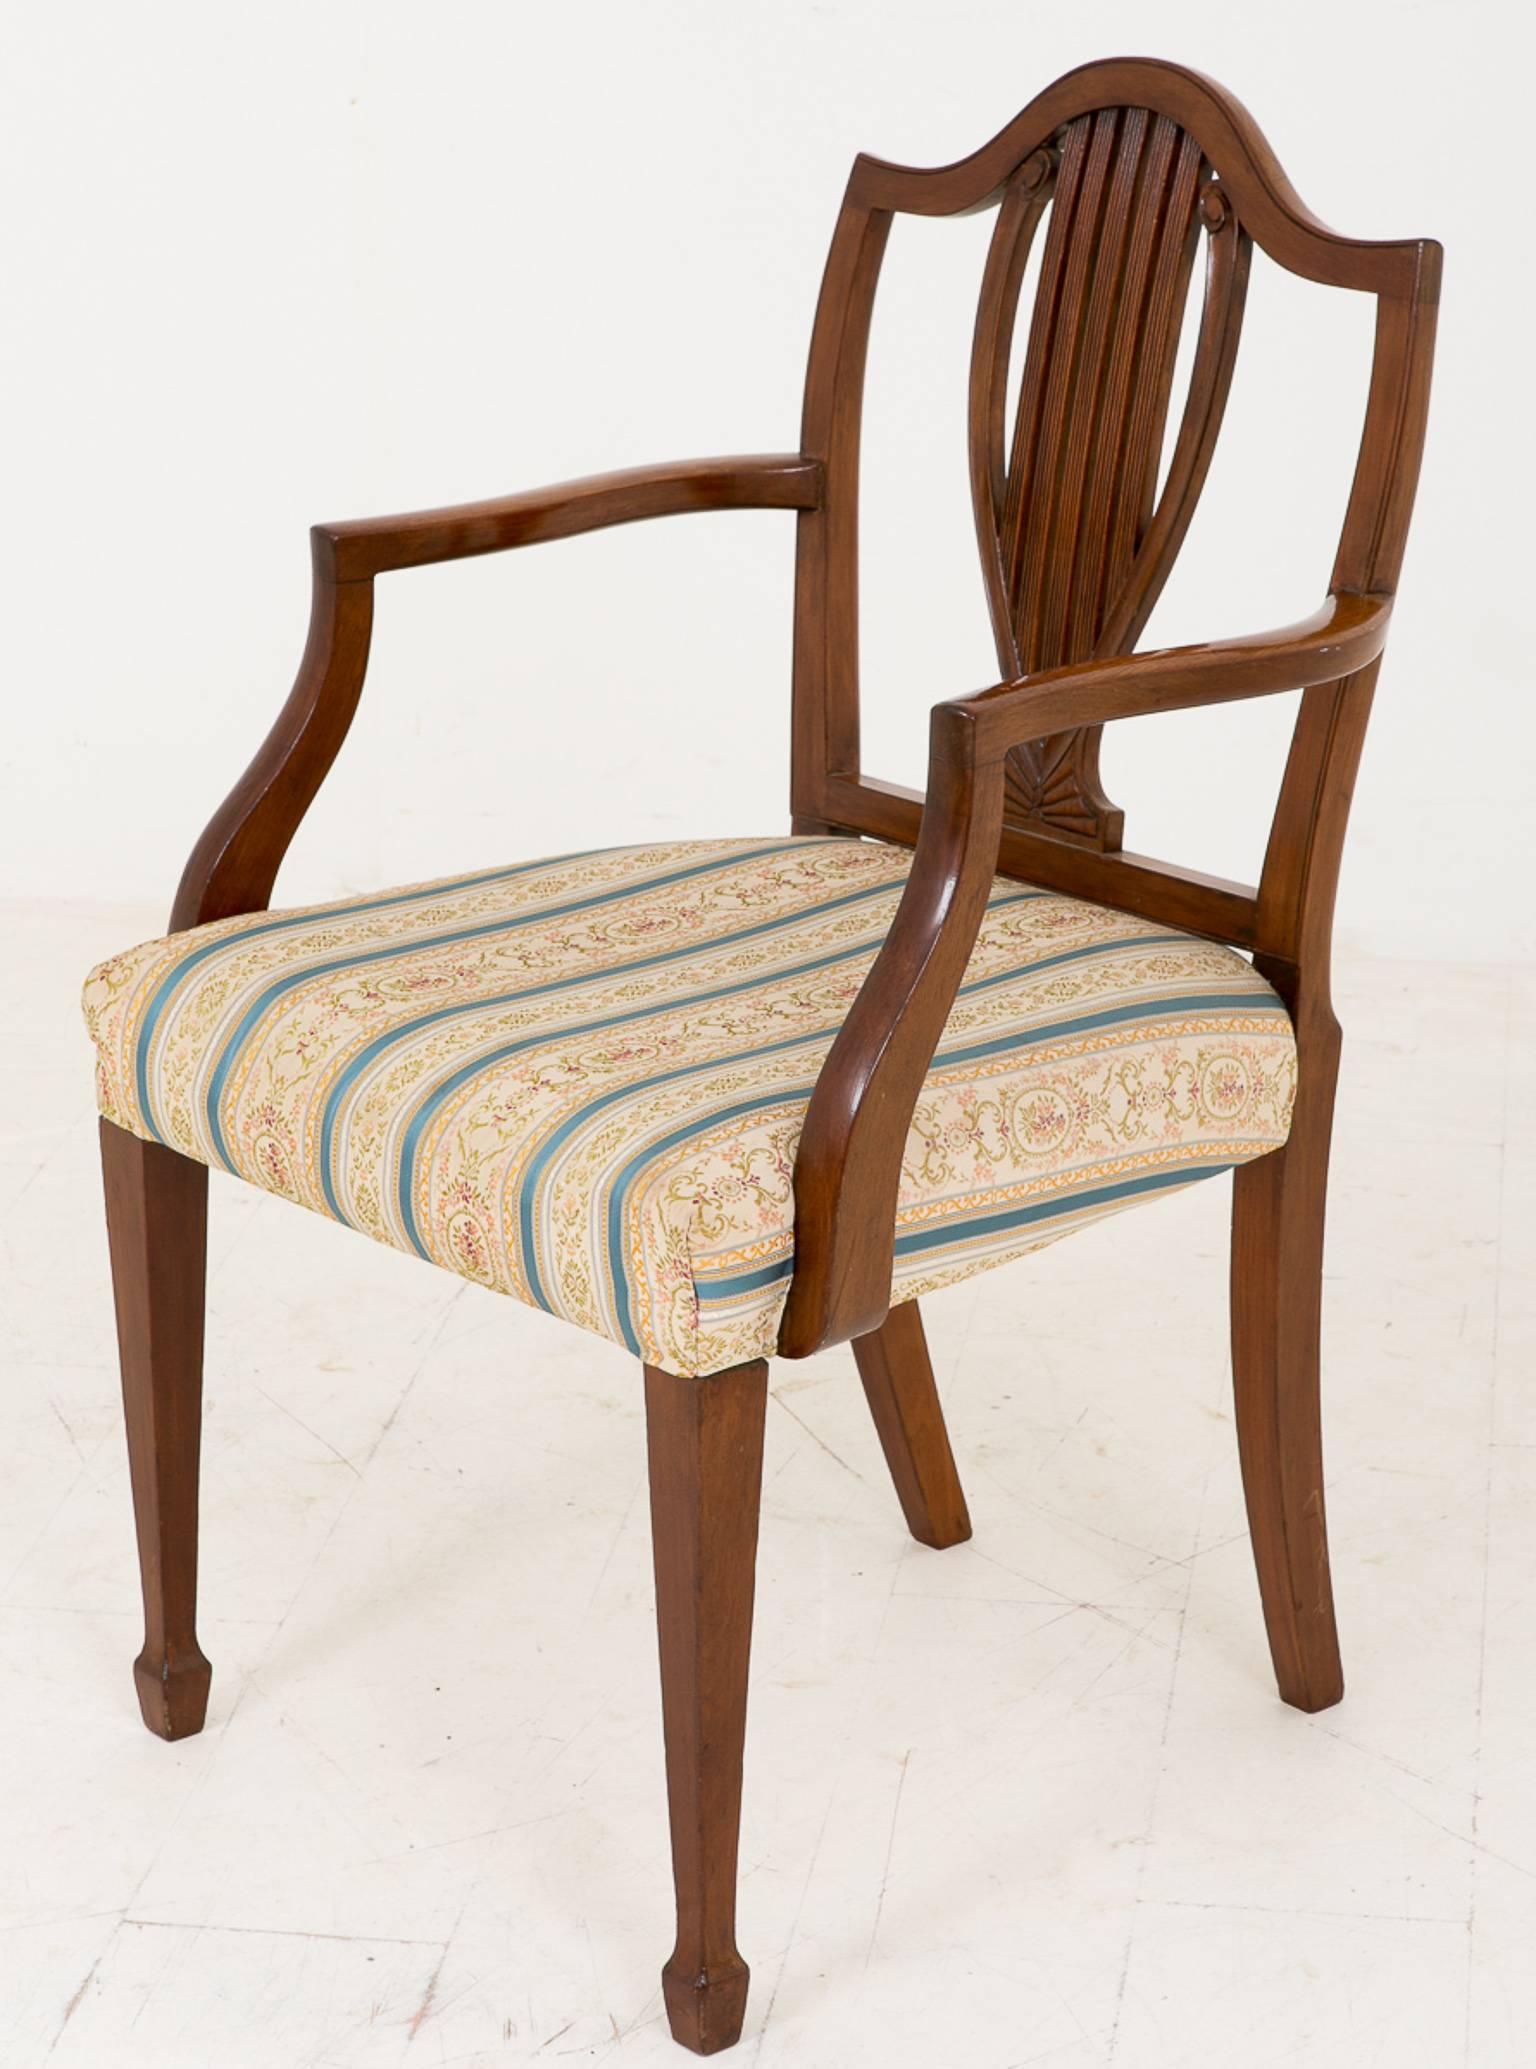 Set of eight (six + two) mahogany Hepplewhite influenced chairs.
Standing on tapered legs with a spade foot.
Featuring a carved and fluted lyre shaped back splat.

Size:
Single (no arms) 
width 20" (51cm)
height 37" (94cm)
seat